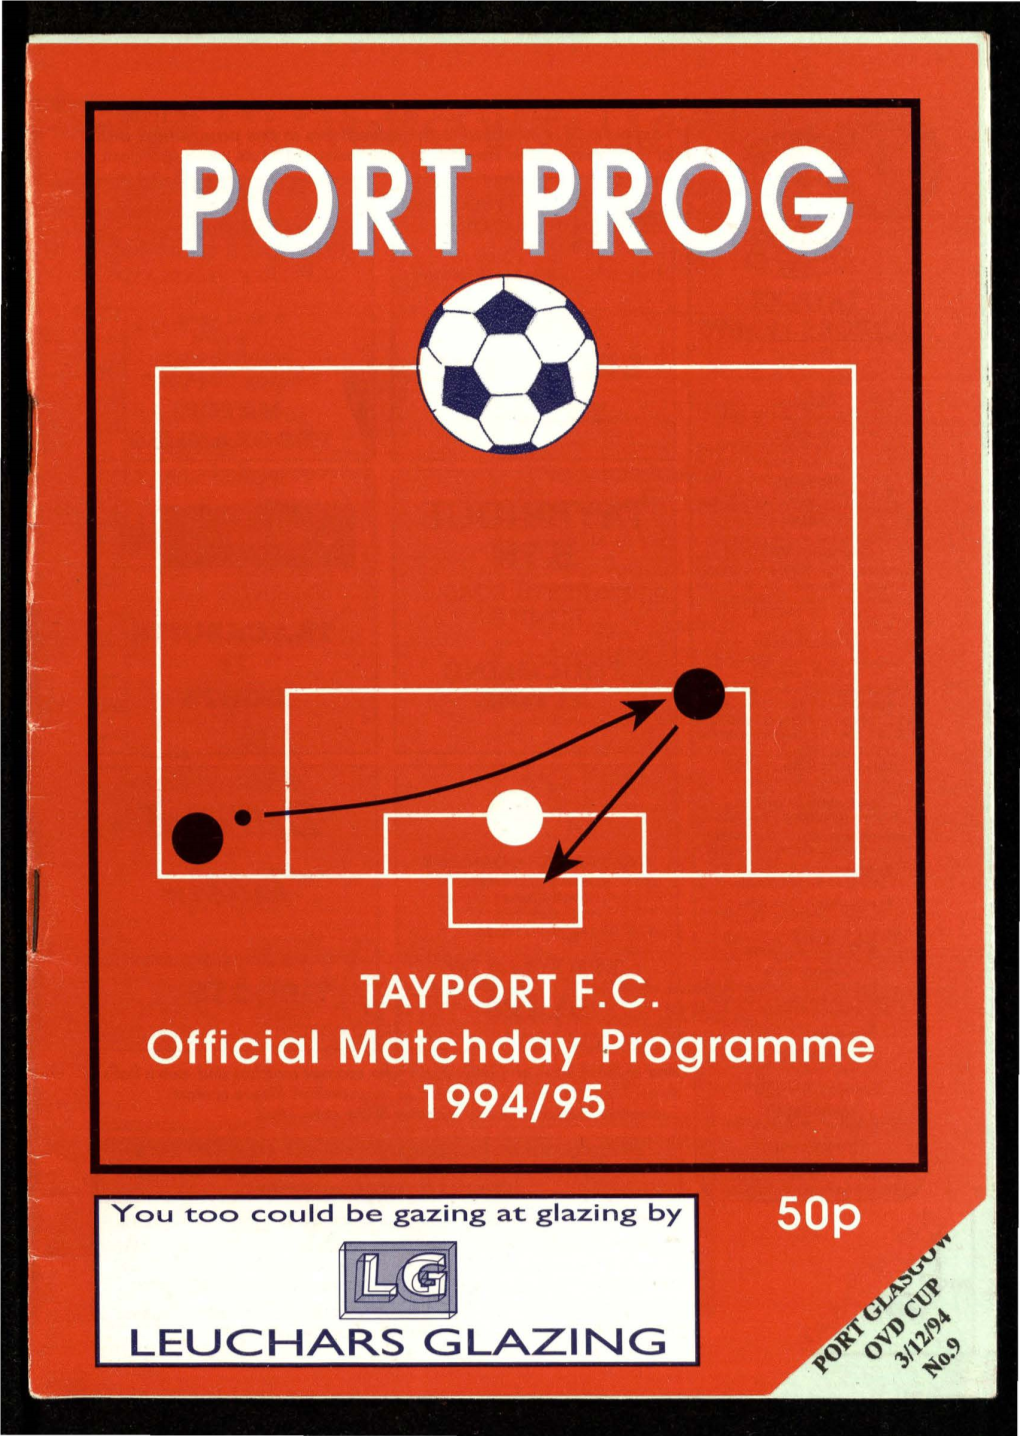 TAYPORT F.C. Official Matchday Programme